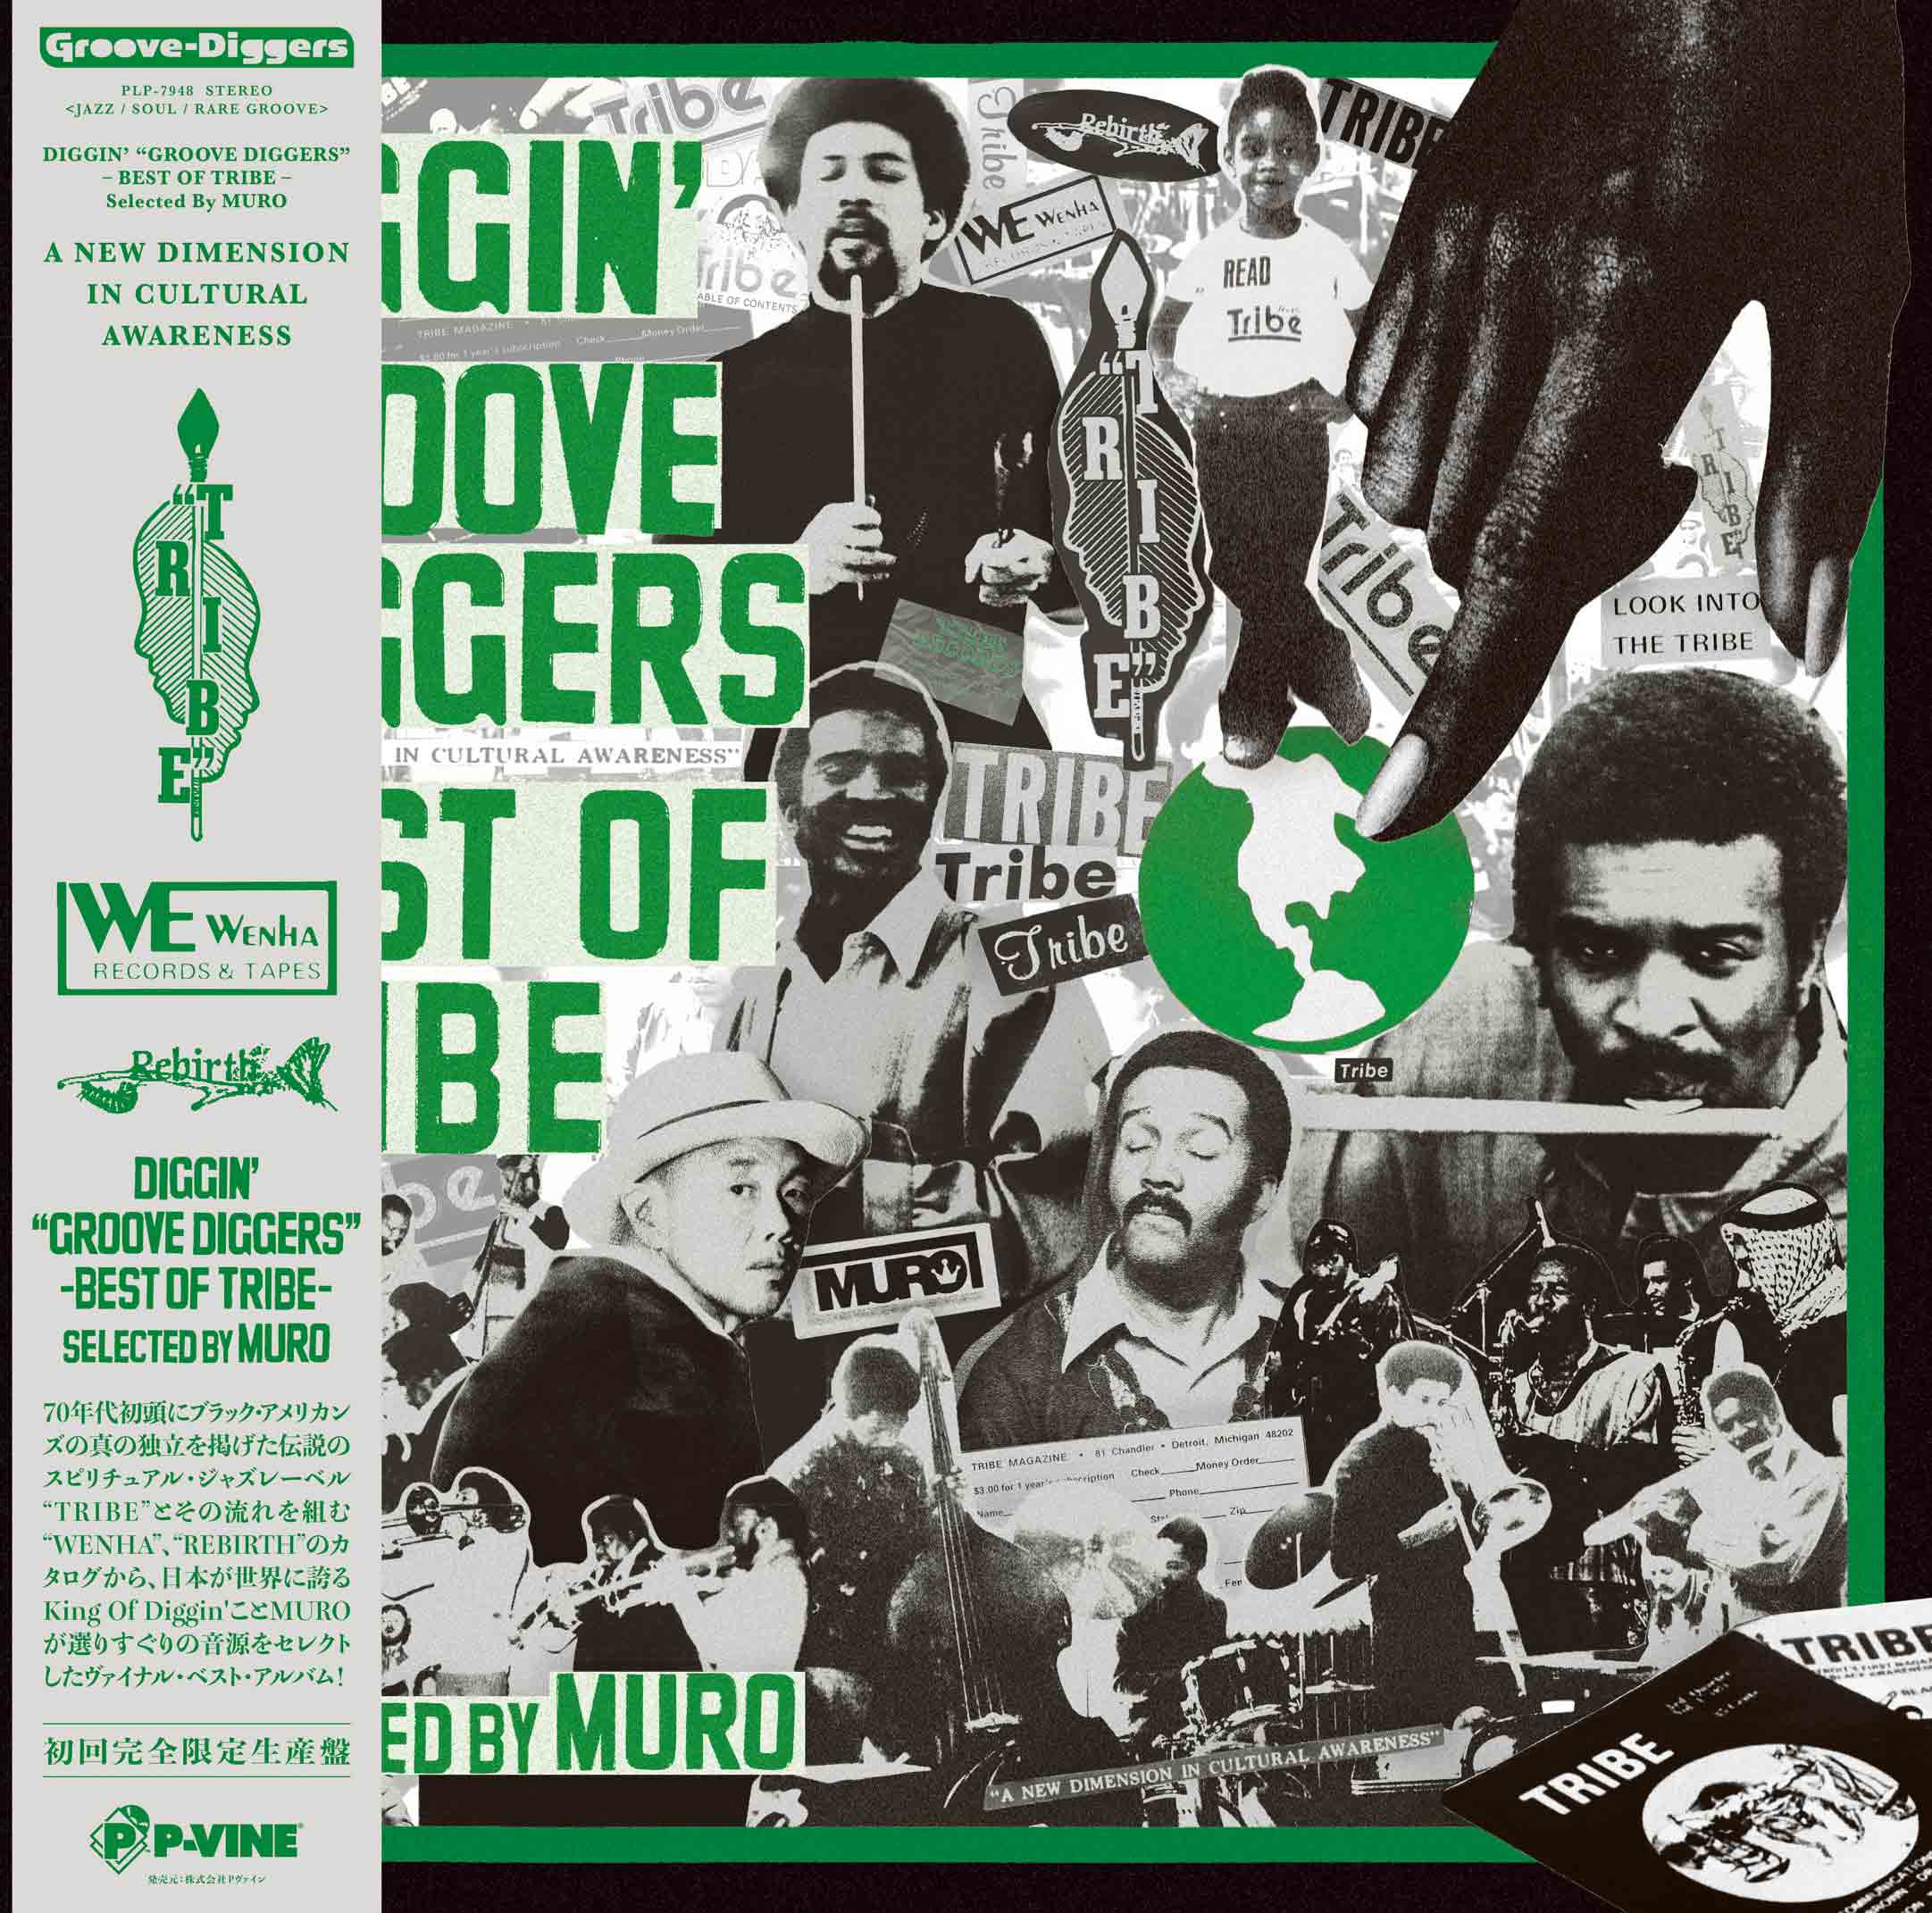 DIGGIN' "GROOVE DIGGERS" - BEST OF TRIBE - Selected By MURO